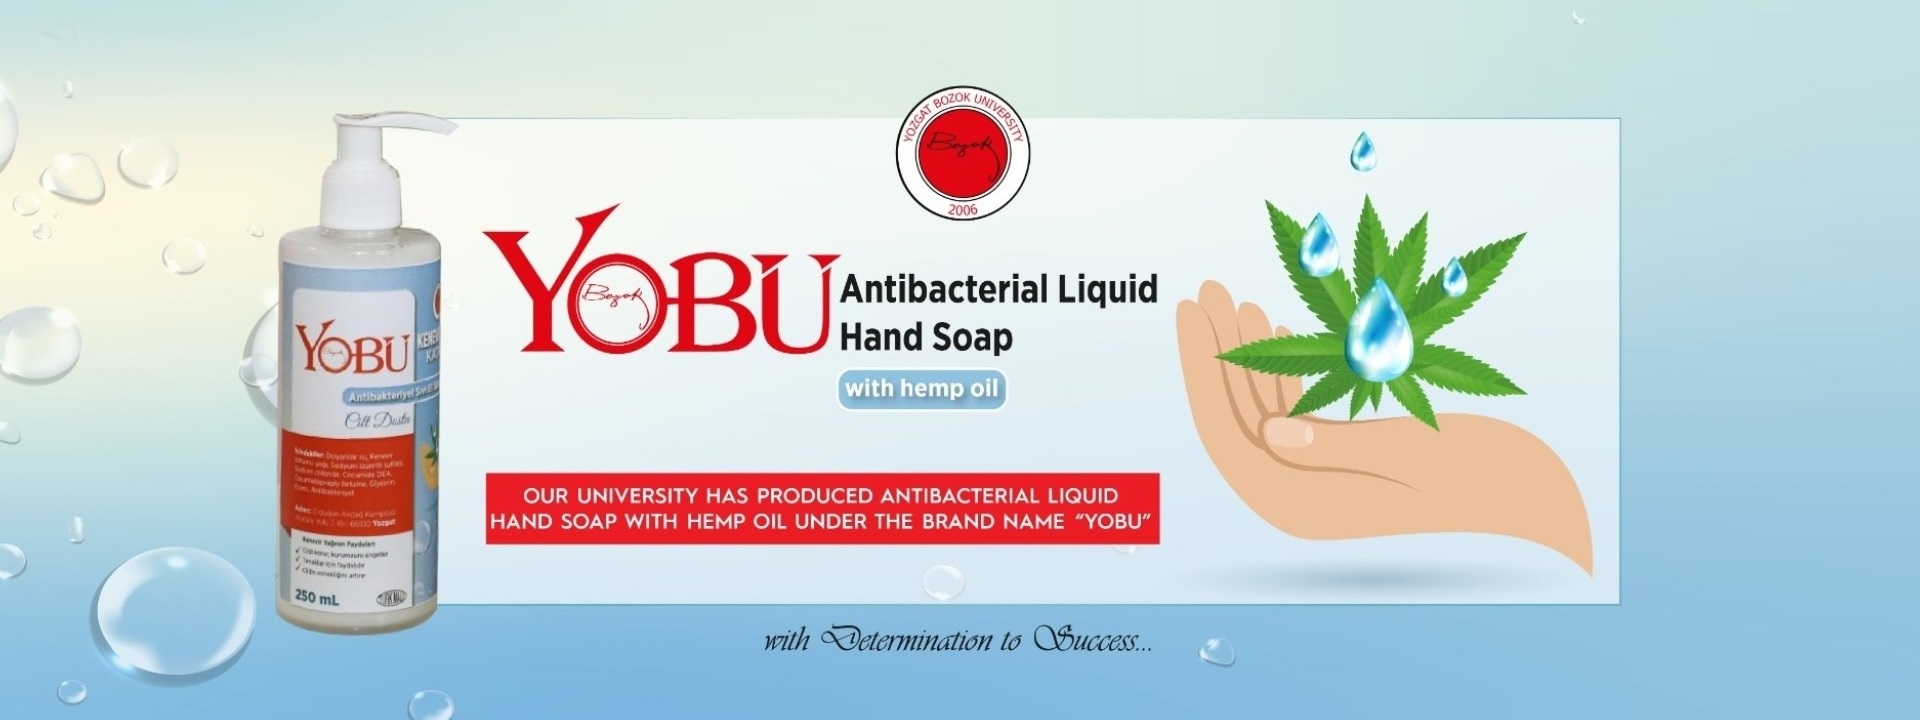 OUR UNIVERSITY HAS PRODUCED  ANTI-BACTERIAL LIQUID SOAP WITH HEMP OIL UNDER THE BRAND NAME ‘’YOBÜ’’